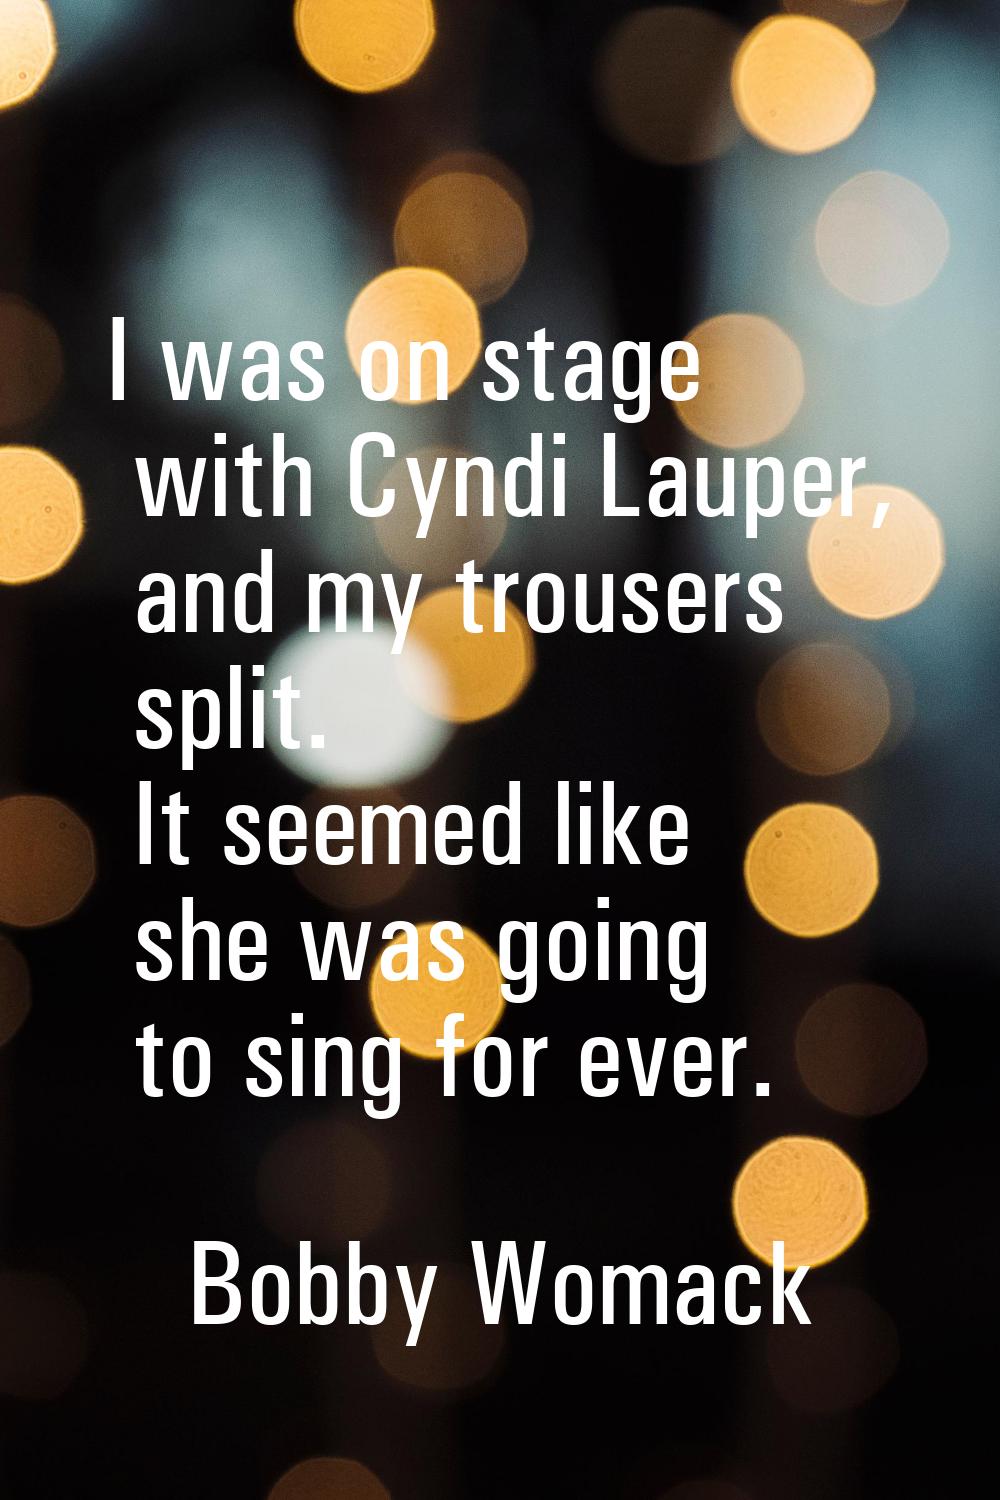 I was on stage with Cyndi Lauper, and my trousers split. It seemed like she was going to sing for e